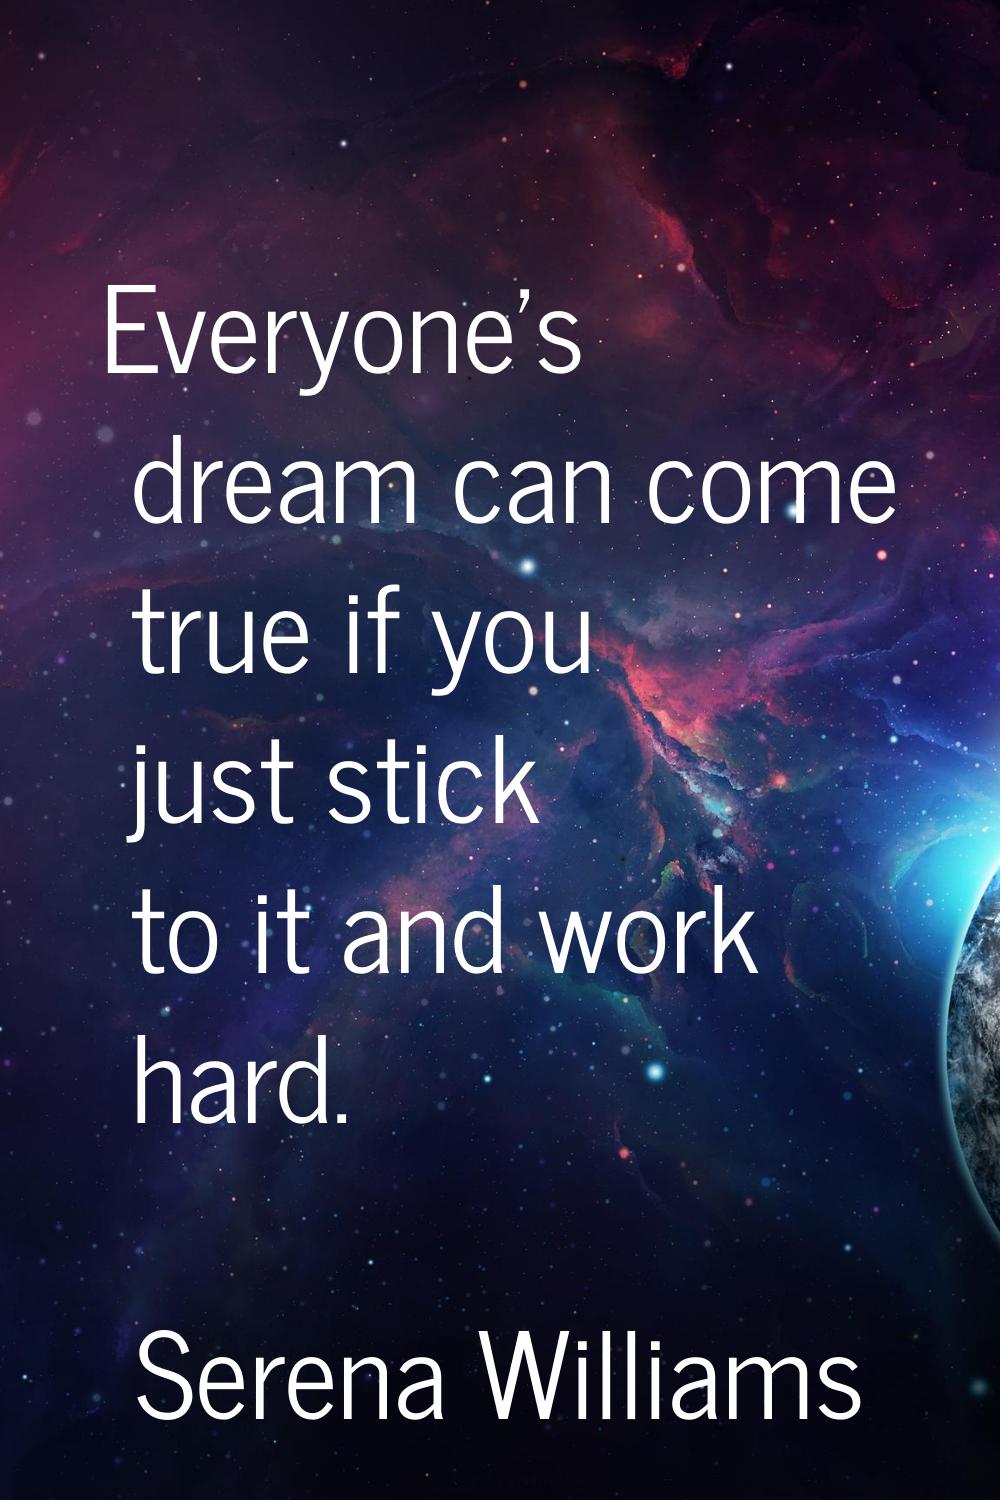 Everyone's dream can come true if you just stick to it and work hard.